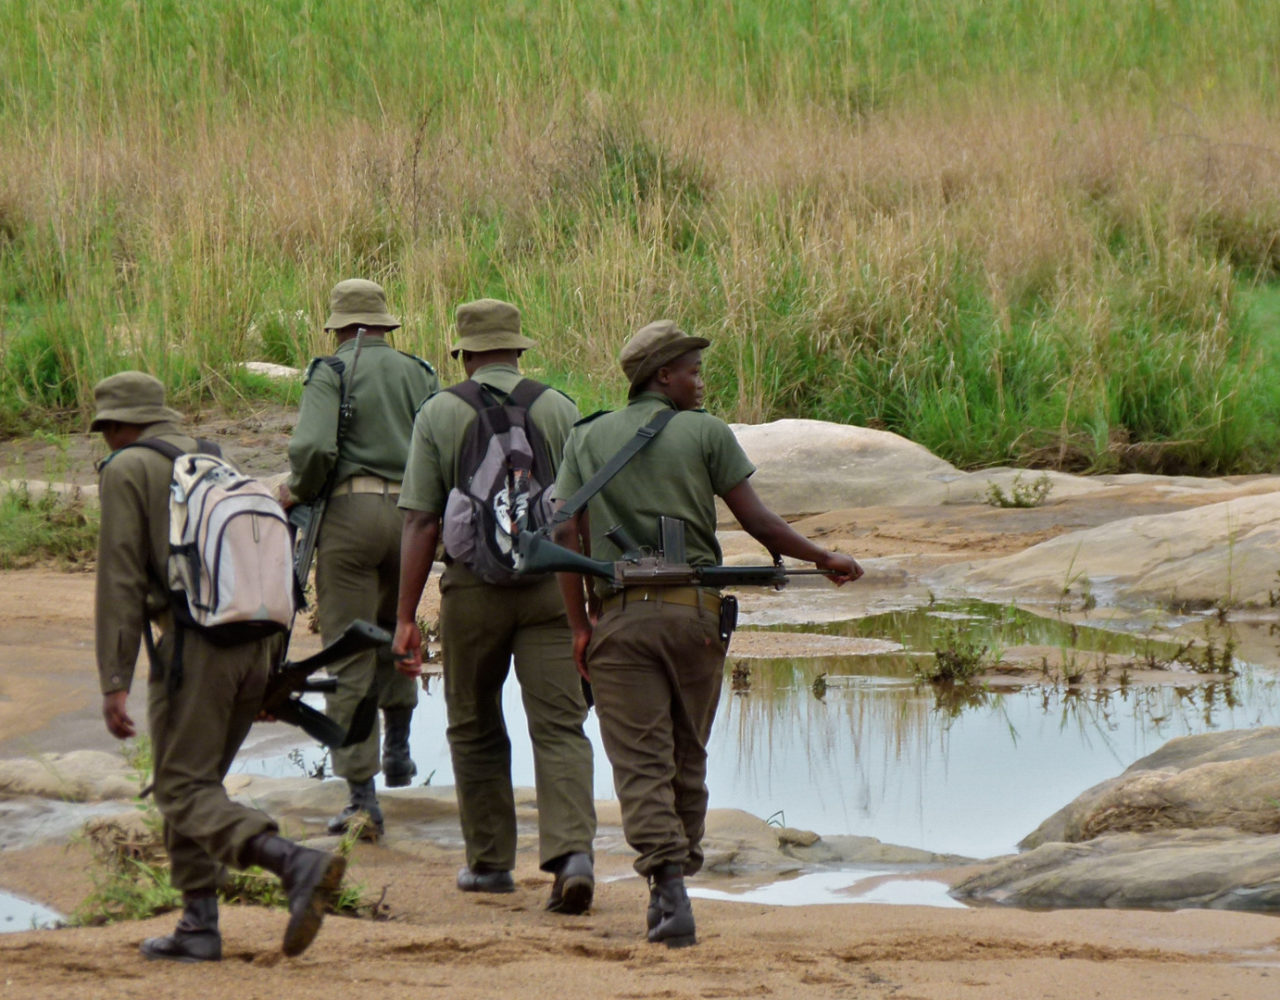 Wildlife Rangers Face A ‘Toxic Mix’ of Mental Strain and Lack of Support